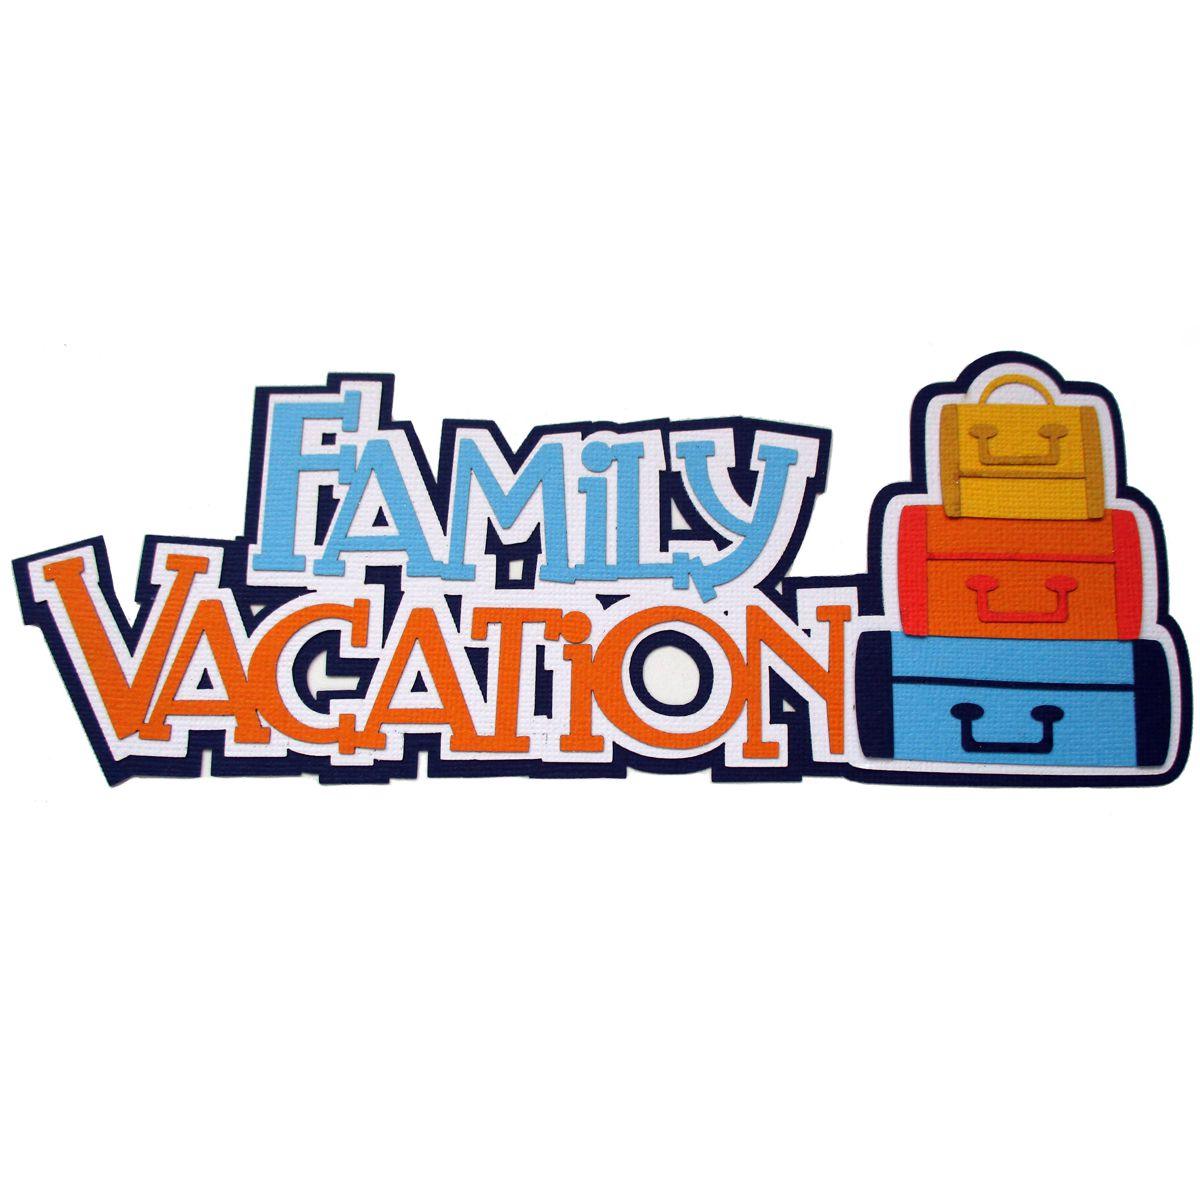 Family Vacation Title Fully-Assembled 4 x 9 Laser Cut Scrapbook Embellishment by SSC Laser Designs